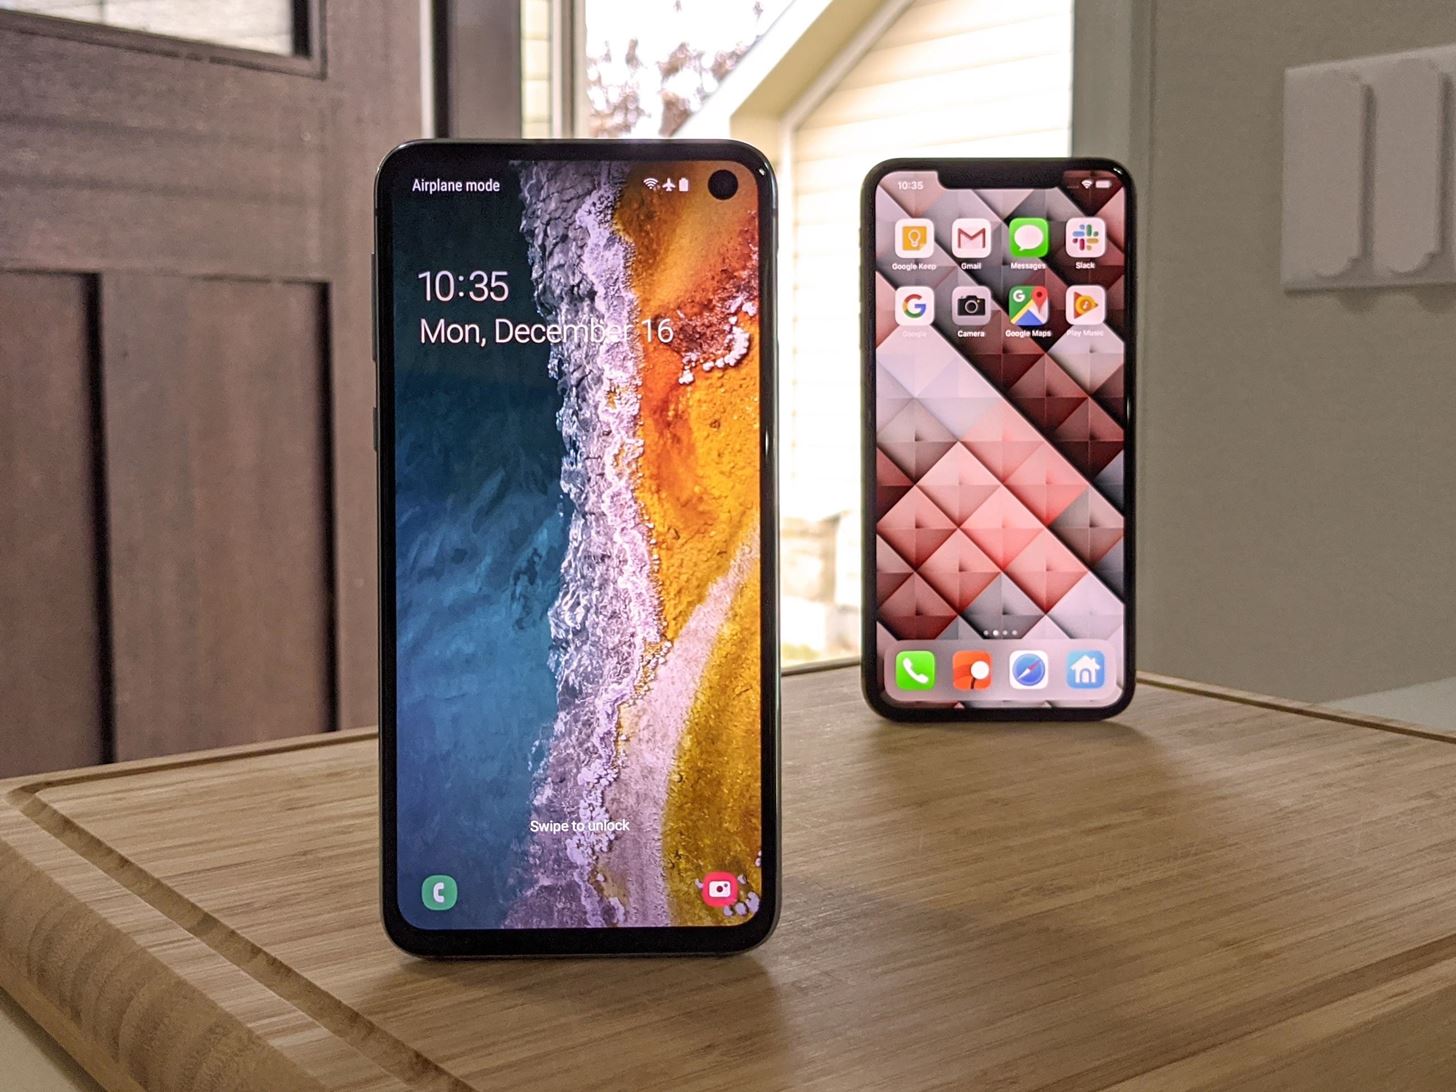 Our Writers & Editors Pick Their Favorite Phones of 2019